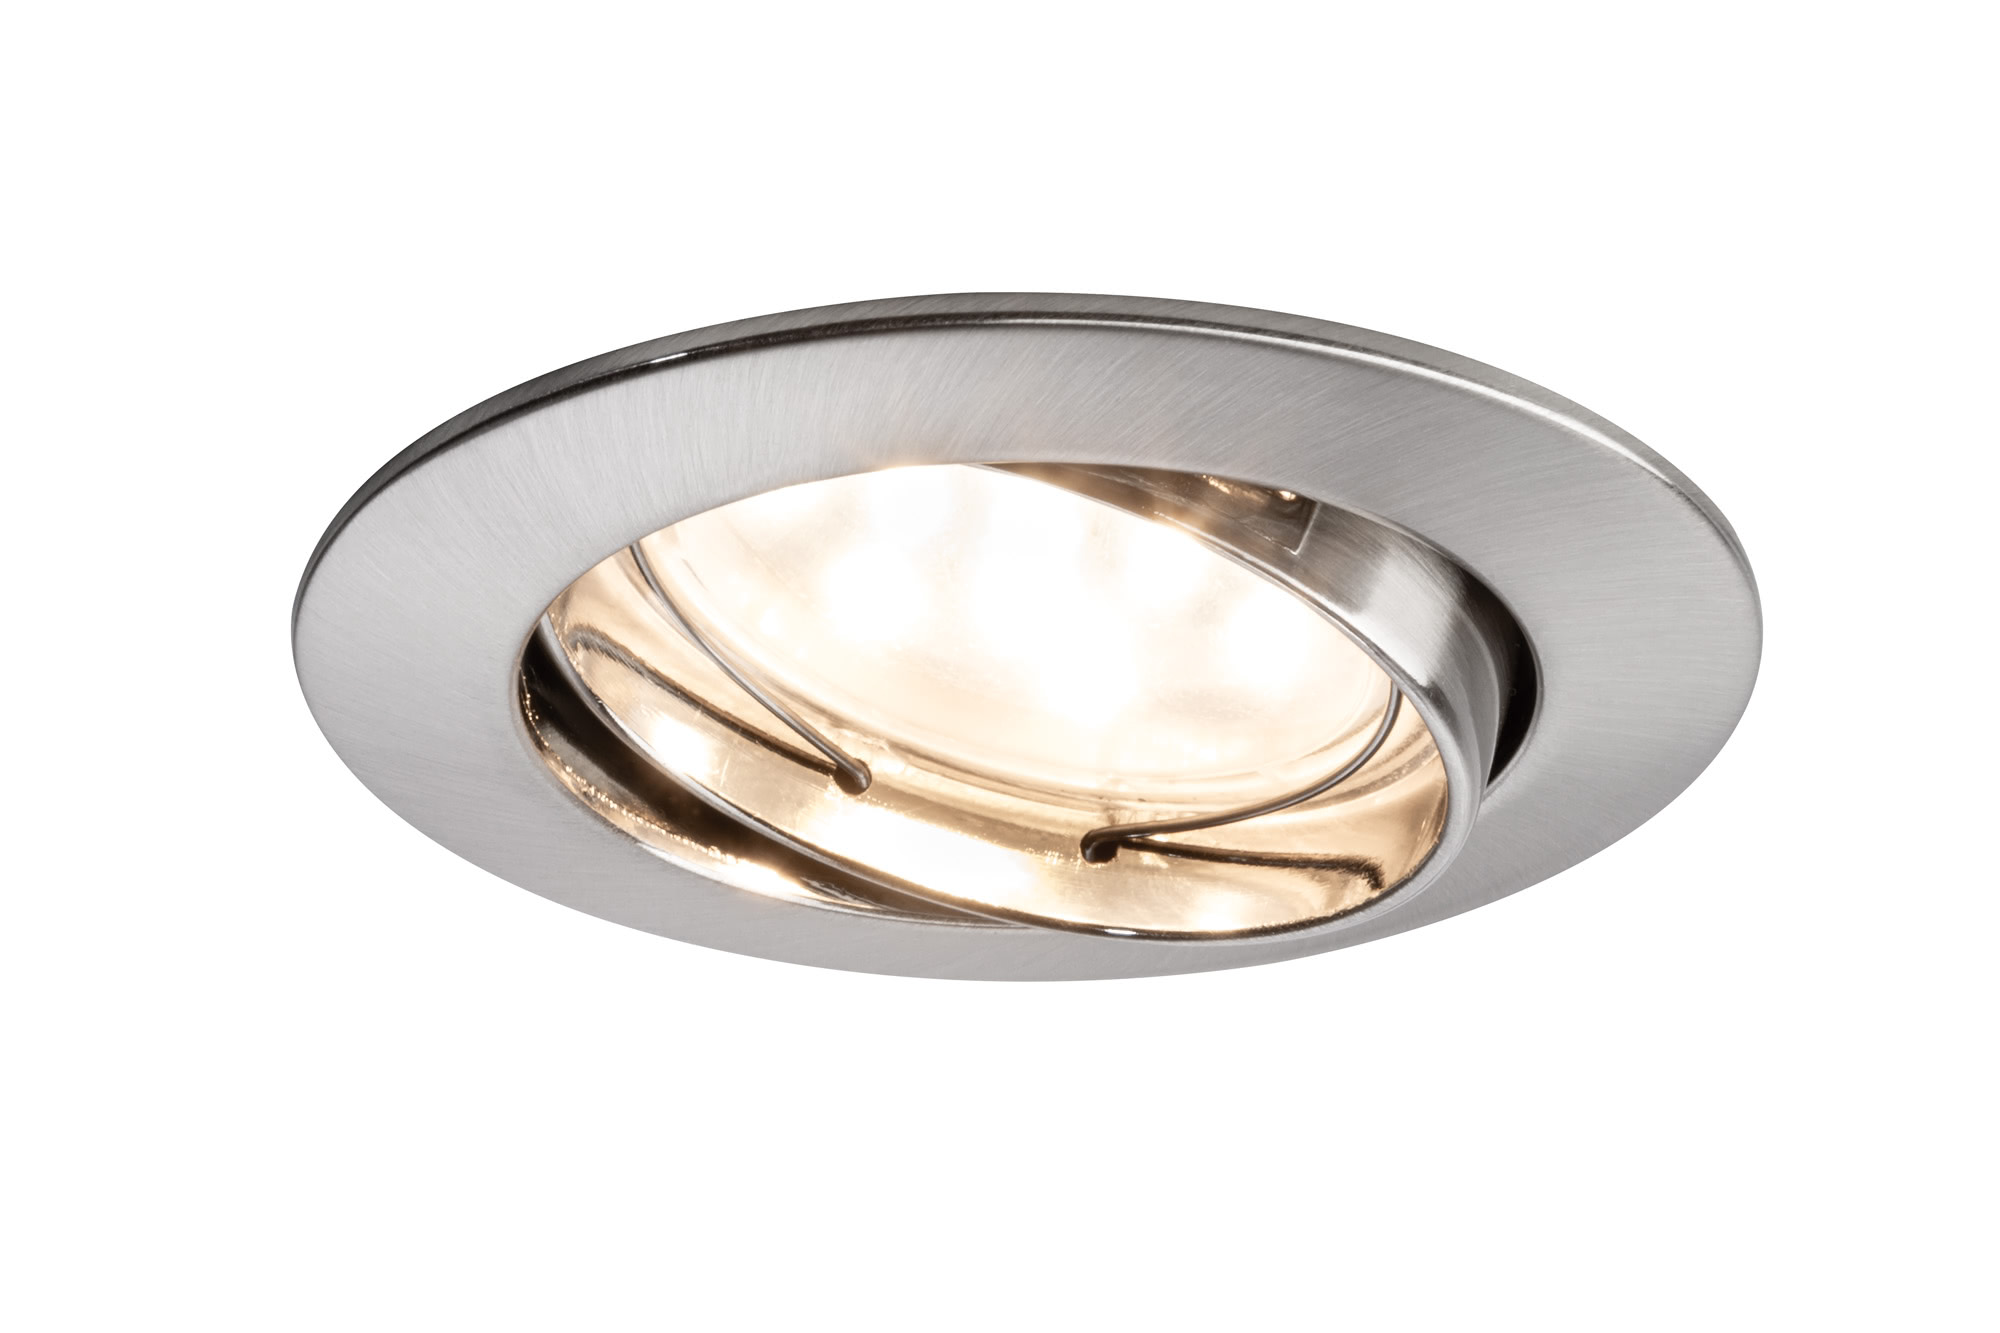 92767 Светильник EBL Coin LED 1x6,5W 51mm rund schw eis-g The Coins are innovative and user-friendly recessed spotlights that are suitable for new installations as well as replacing existing installations. Since they are exceptionally flat, they can be installed in ceilings with a cavity of only 30 to 35В millimetres. From 50В centimetres to 5В metres or more вЂ“ you determine the spacing between the lights! The simple and tool-free linking of single luminaires using quick clips save more than just time and stress вЂ“ thanks to energy-efficient LED technology with very lower power consumption, the Coins are also easy on the wallet. 927.67 Paulmann